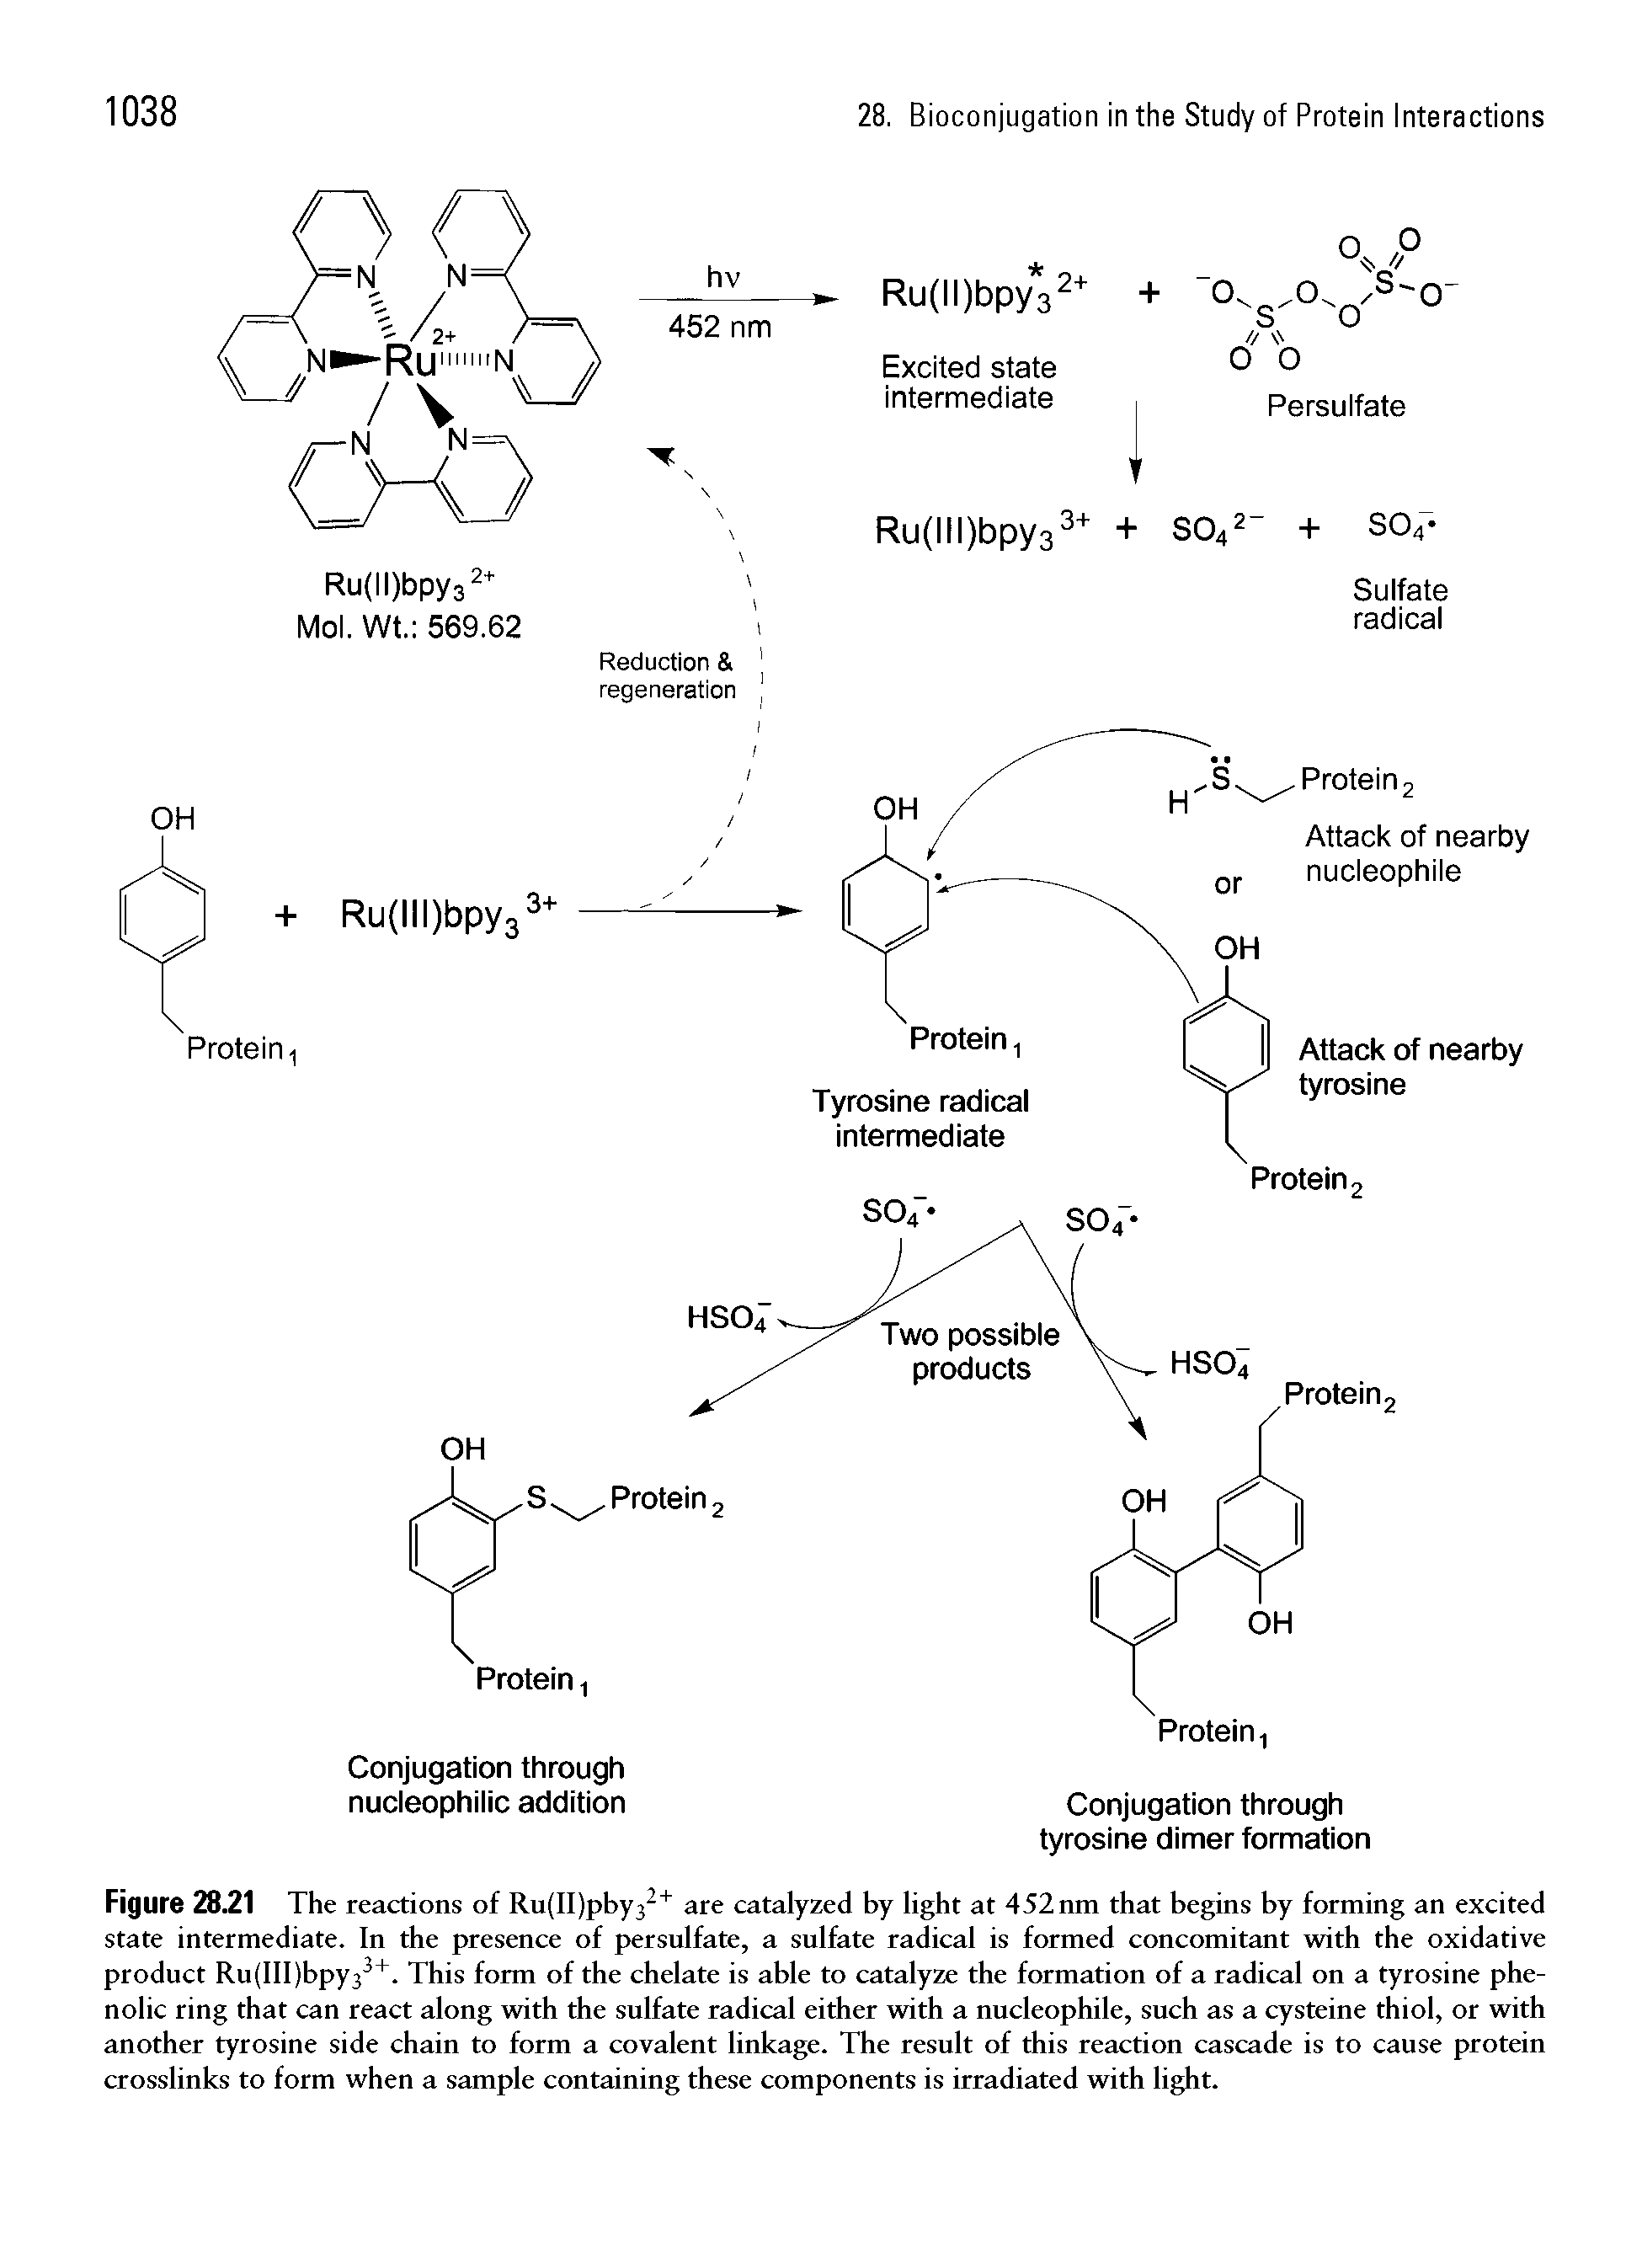 Figure 28.21 The reactions of R u (11) pby 3 + are catalyzed by light at 452 nm that begins by forming an excited state intermediate. In the presence of persulfate, a sulfate radical is formed concomitant with the oxidative product Ru(III)bpy33+. This form of the chelate is able to catalyze the formation of a radical on a tyrosine phenolic ring that can react along with the sulfate radical either with a nucleophile, such as a cysteine thiol, or with another tyrosine side chain to form a covalent linkage. The result of this reaction cascade is to cause protein crosslinks to form when a sample containing these components is irradiated with light.